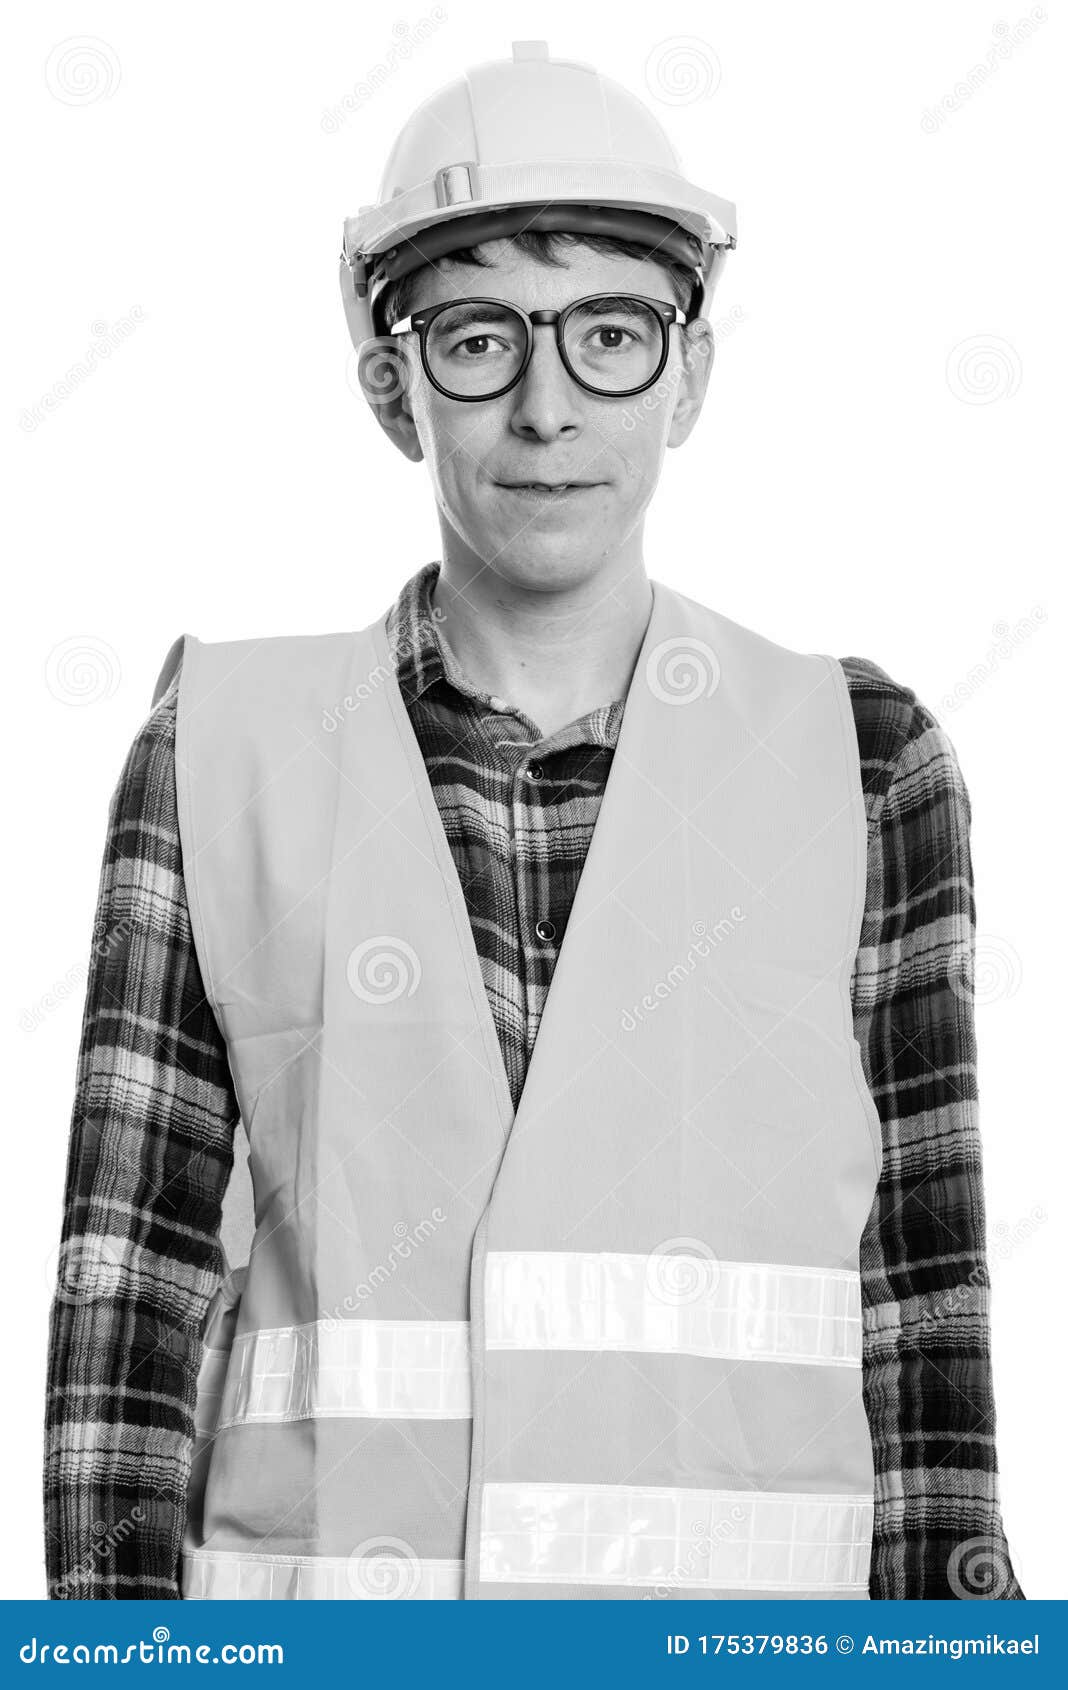 Portrait of Man Construction Worker with Eyeglasses Stock Photo - Image ...